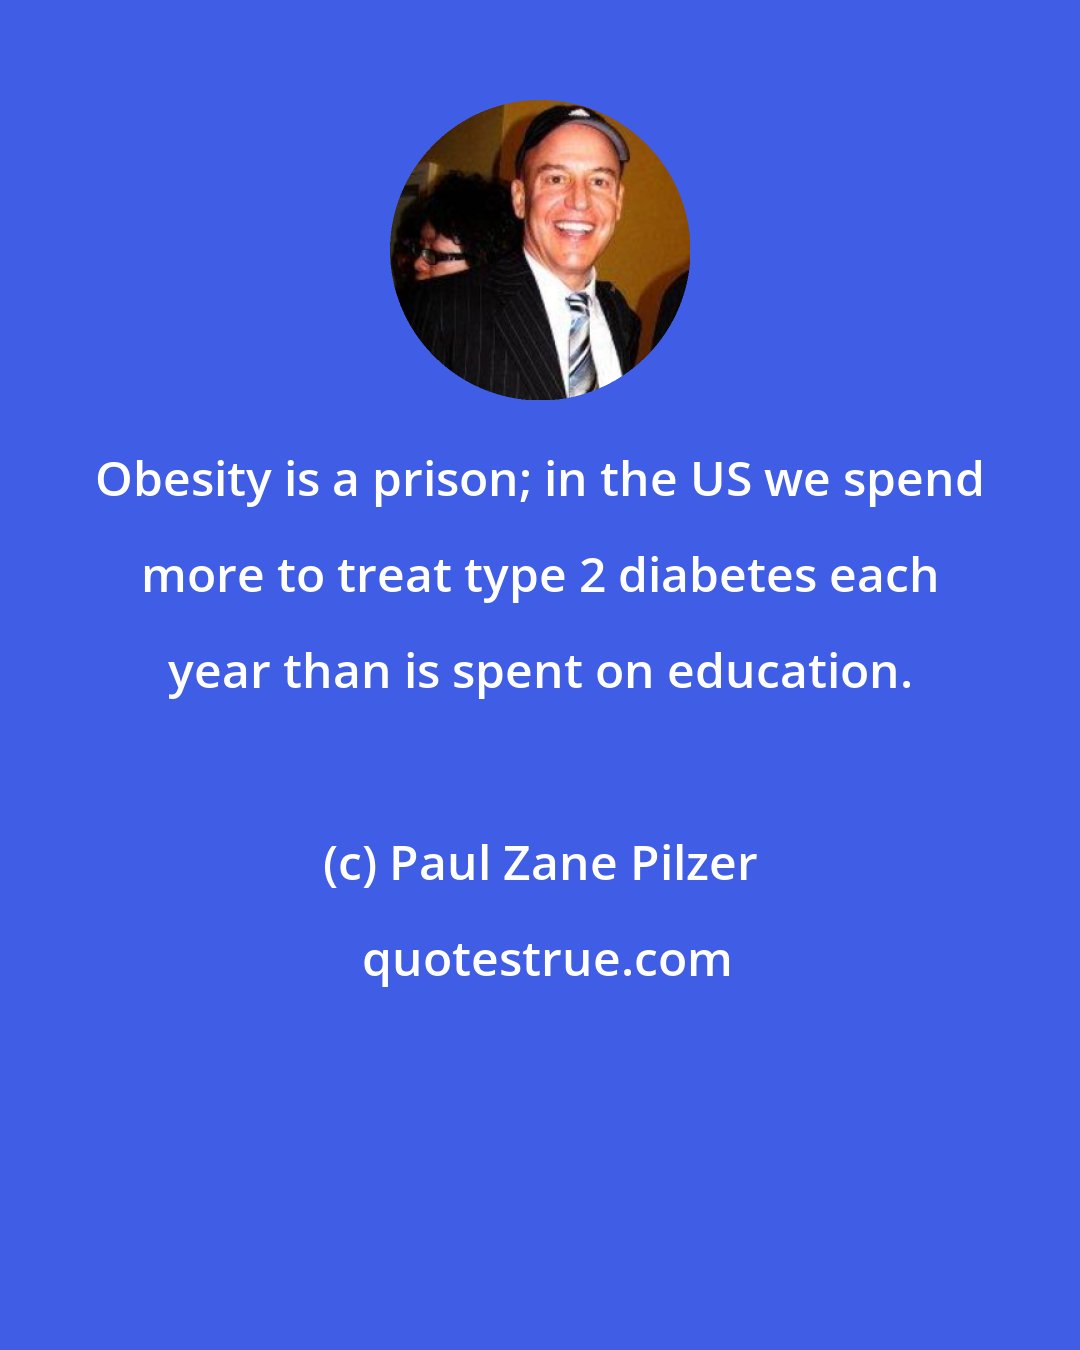 Paul Zane Pilzer: Obesity is a prison; in the US we spend more to treat type 2 diabetes each year than is spent on education.